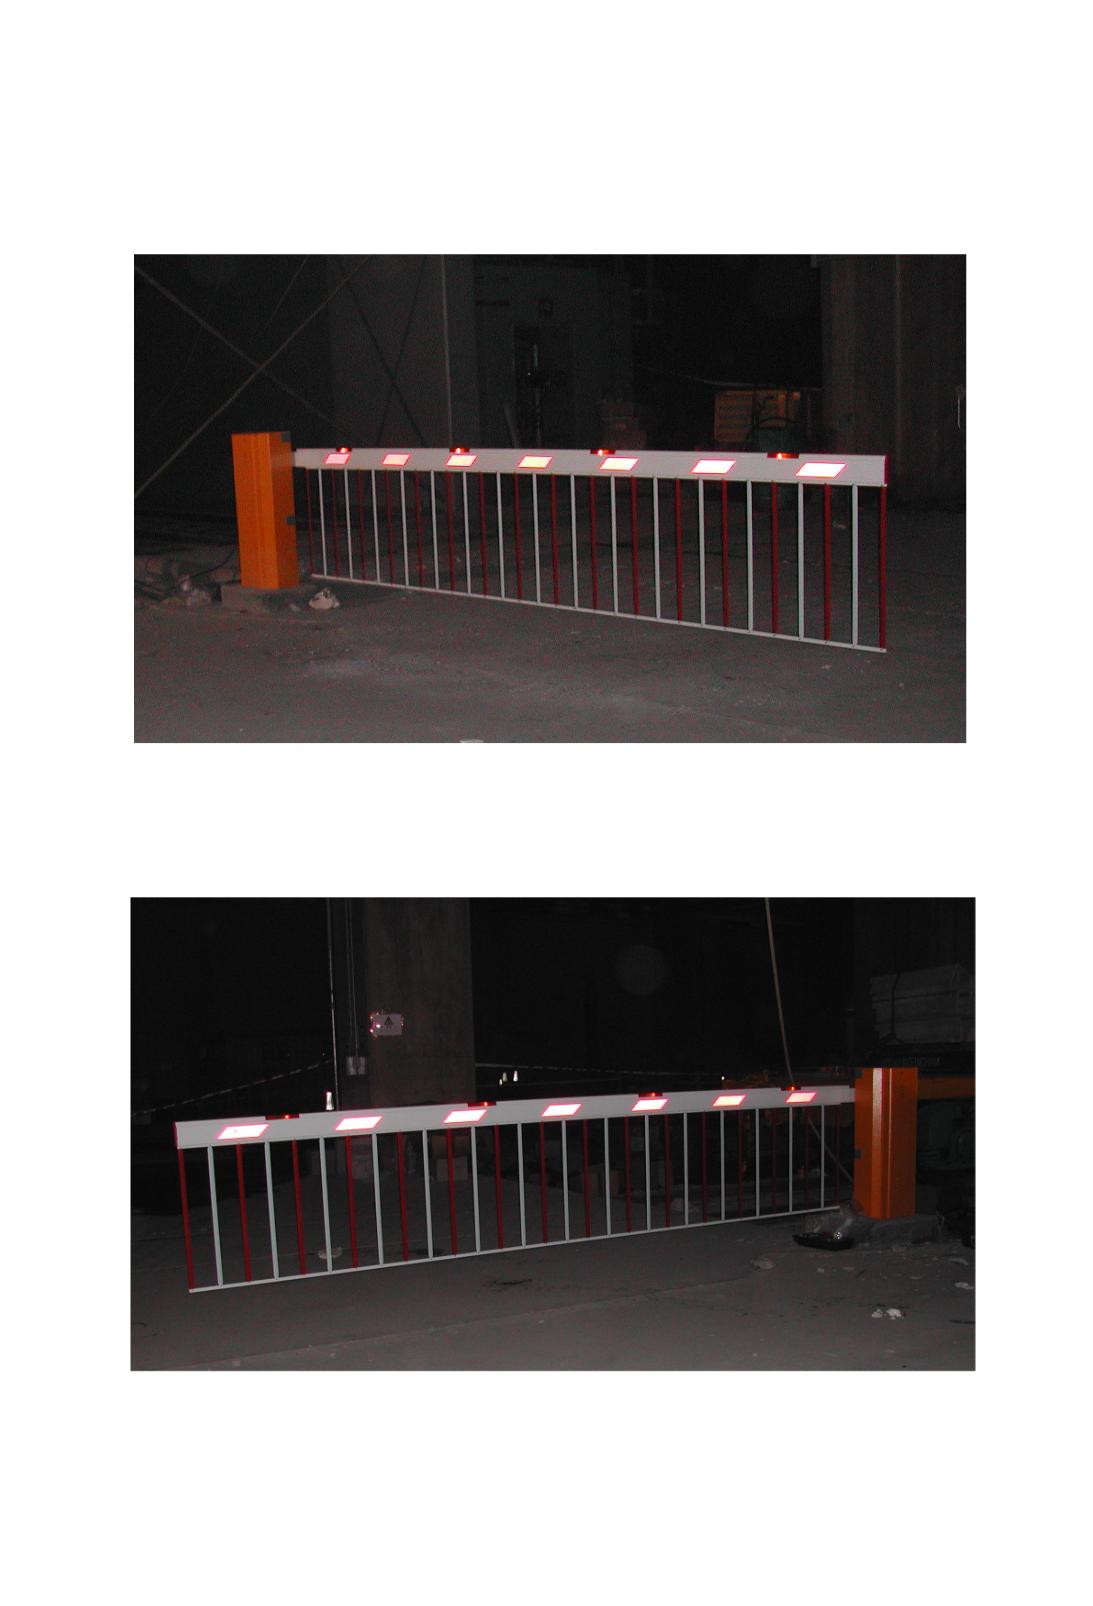 Automation Barrier S-328 Specification